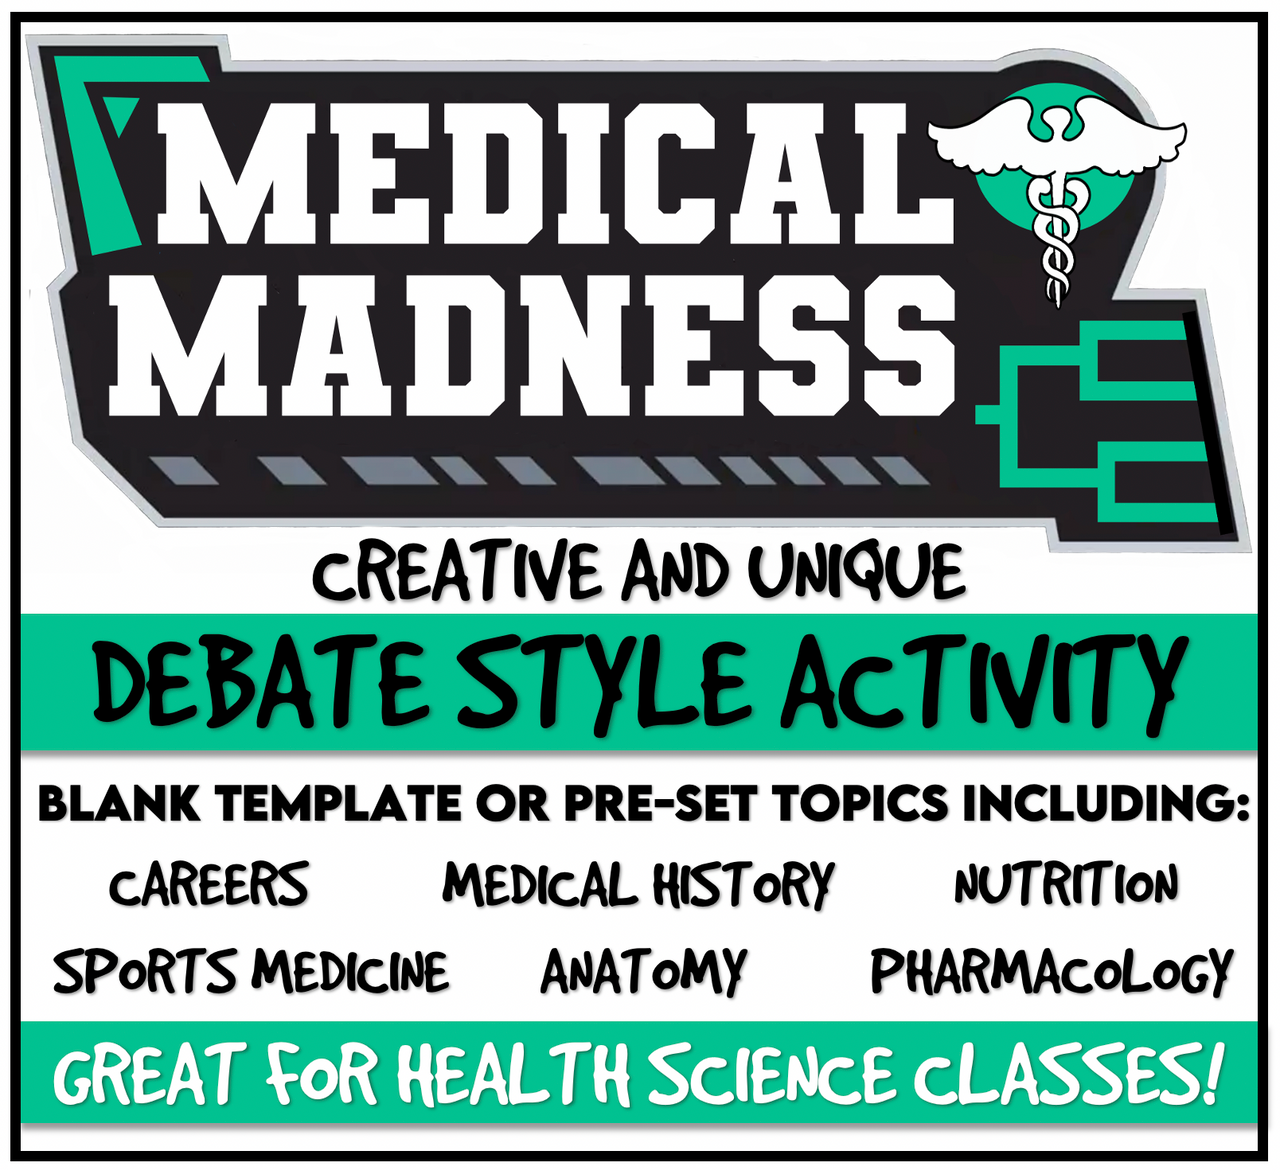 MEDICAL MADNESS- Debate Activity- Options for Nutrition, Anatomy and Pharmacy!